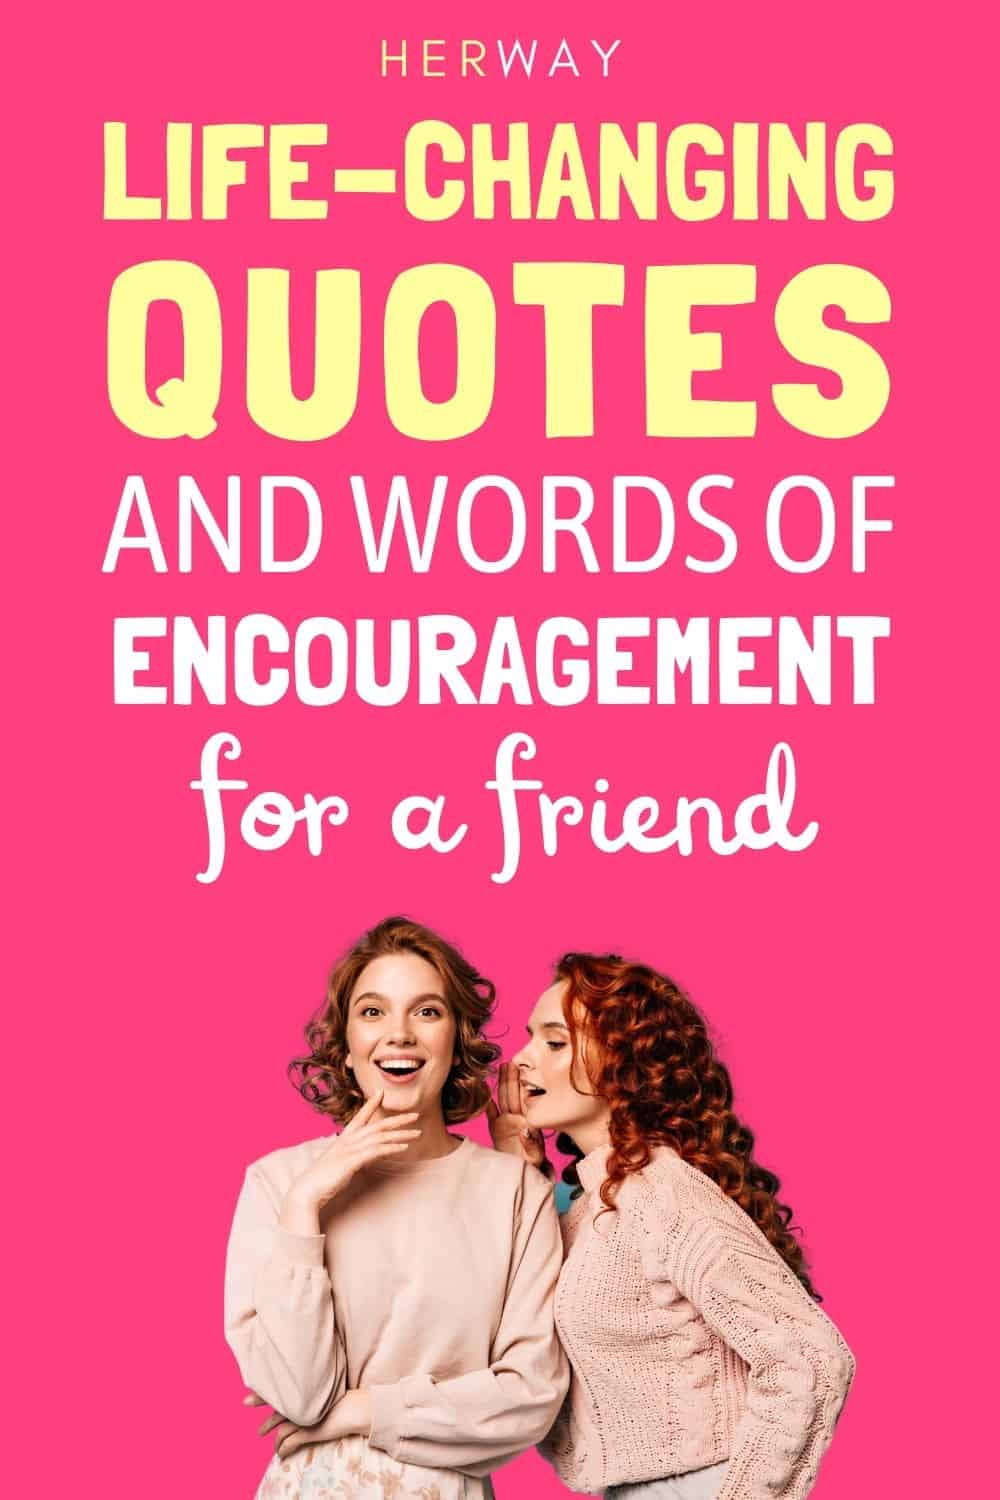 100 Life-Changing Quotes And Words Of Encouragement For A Friend Pinterest